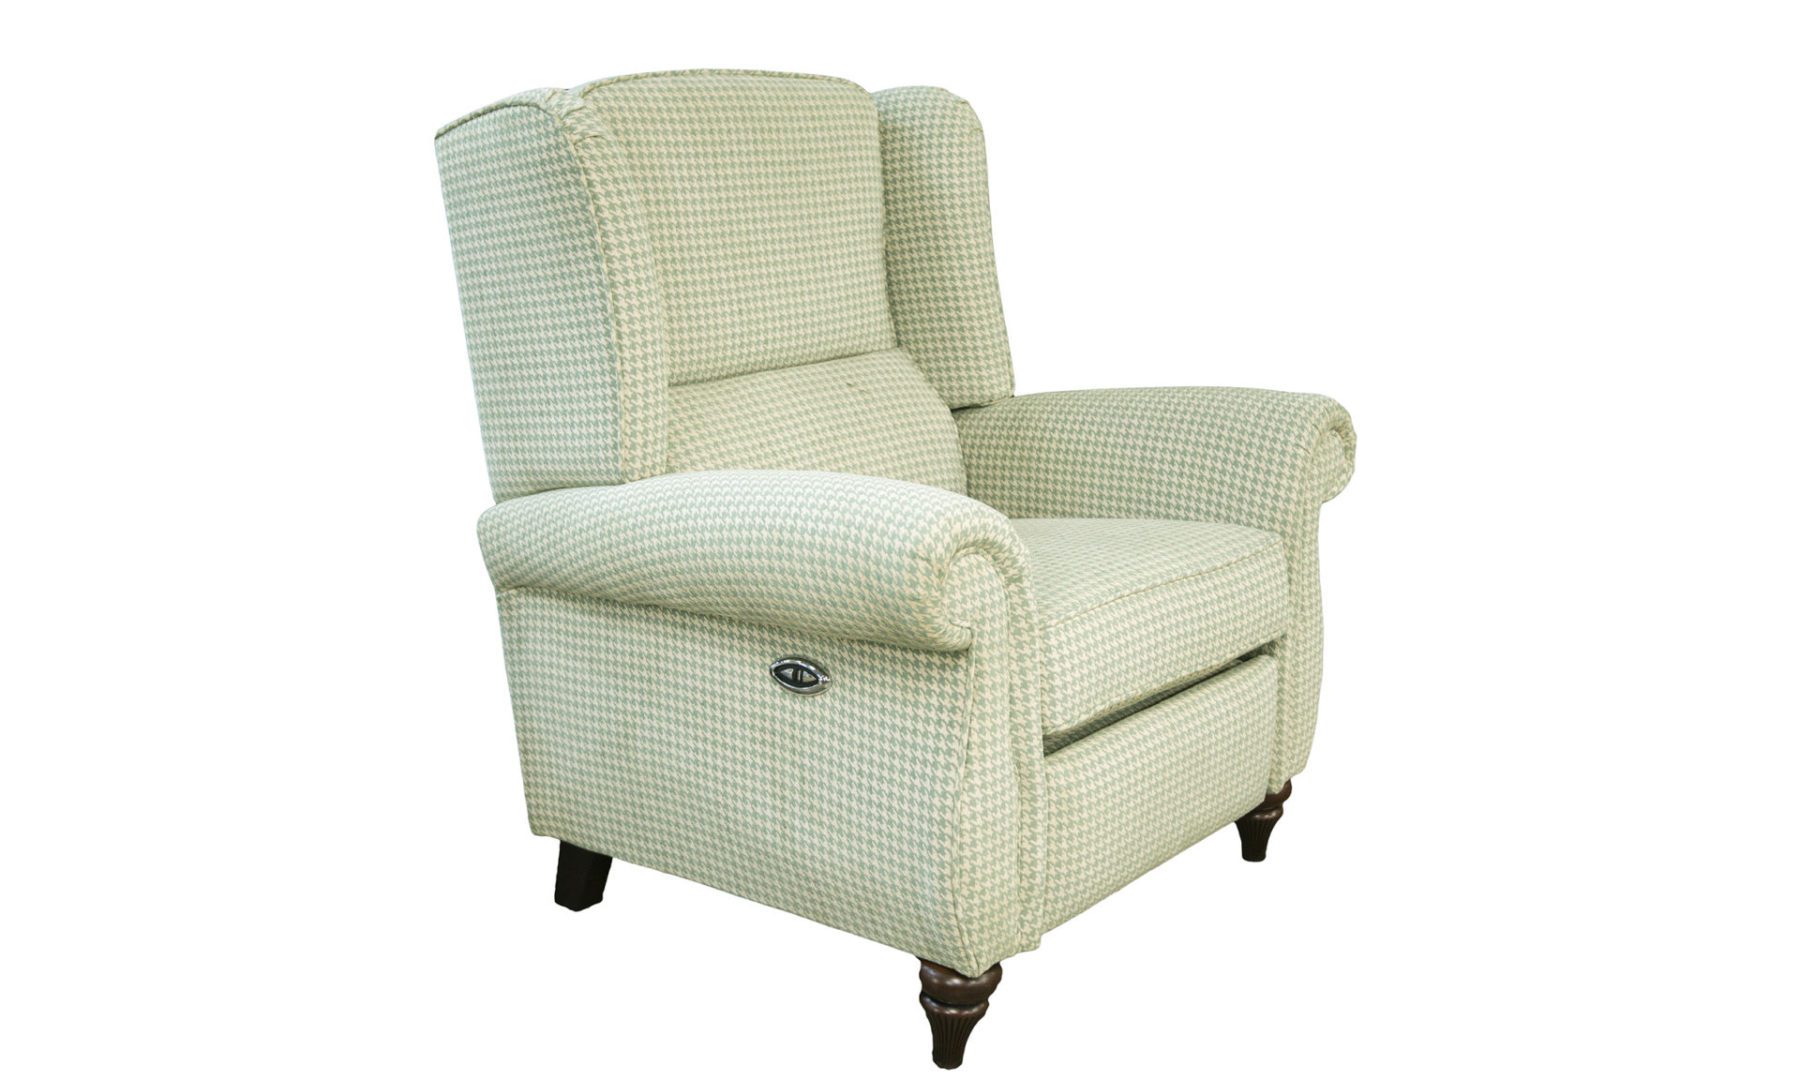 Greville Recliner Chair in Poppy Aqua, Silver Collection of Fabrics